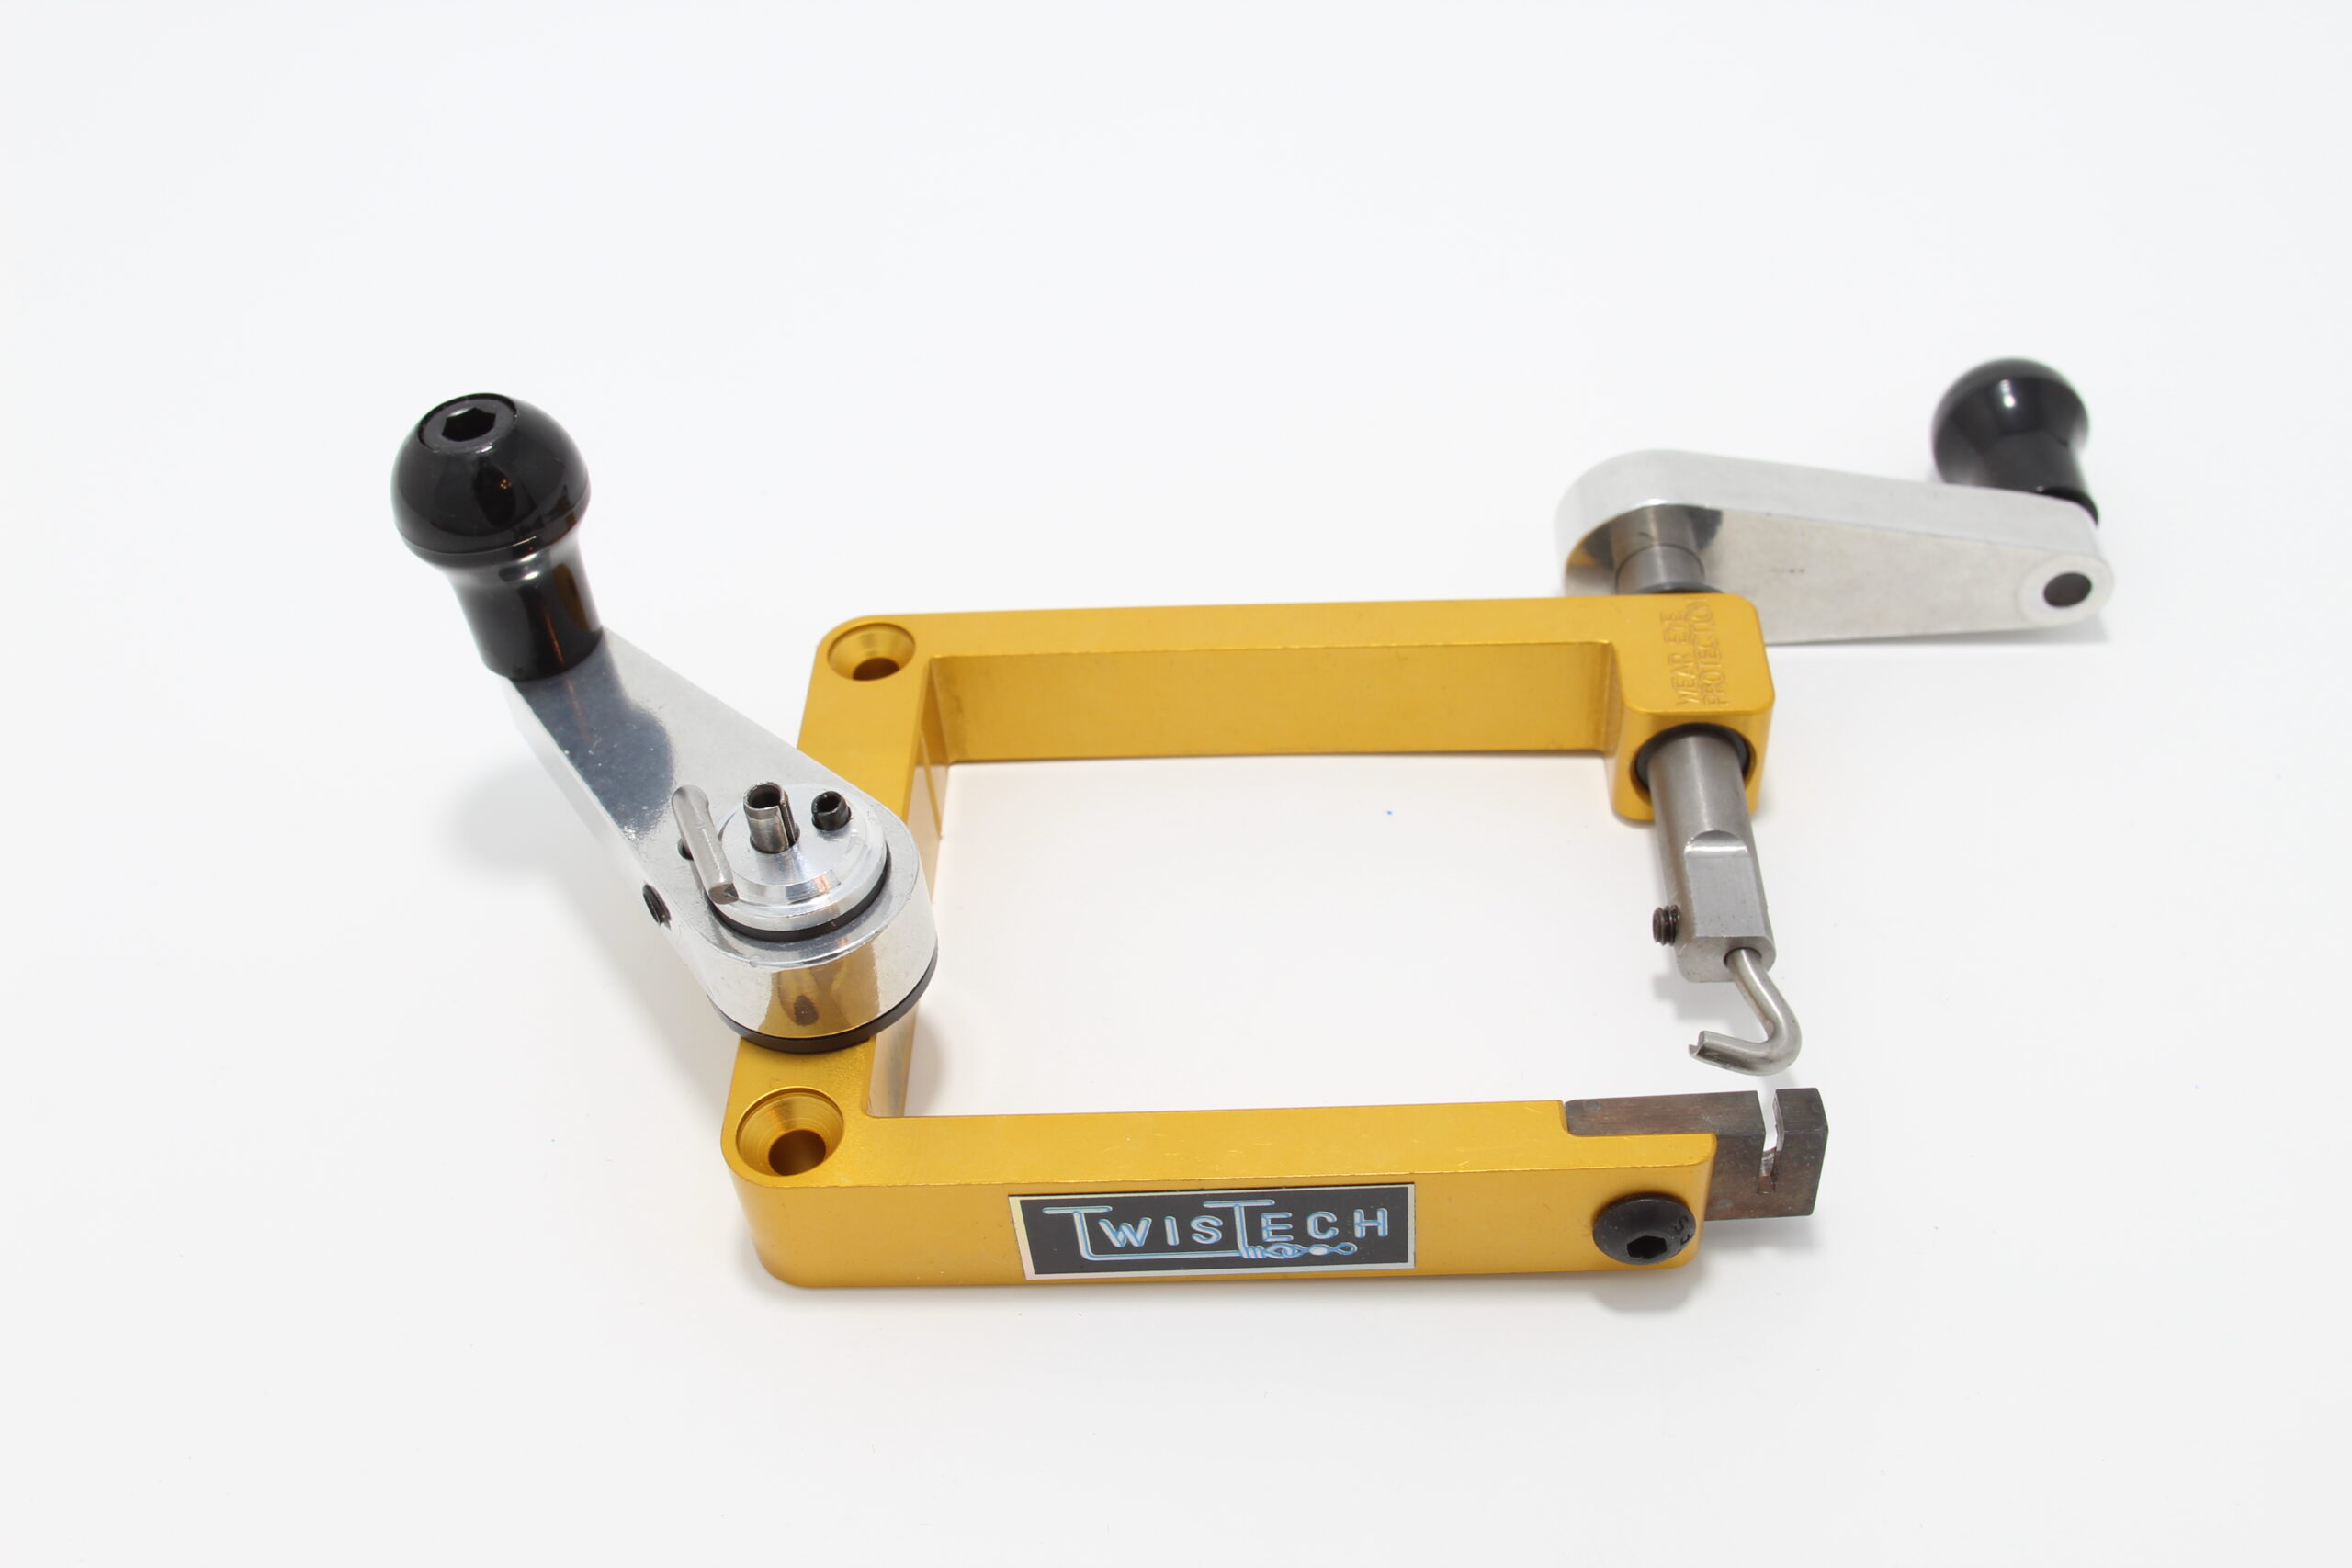 TwisTech Wire Forming Tools - Poulsen Cascade Tackle